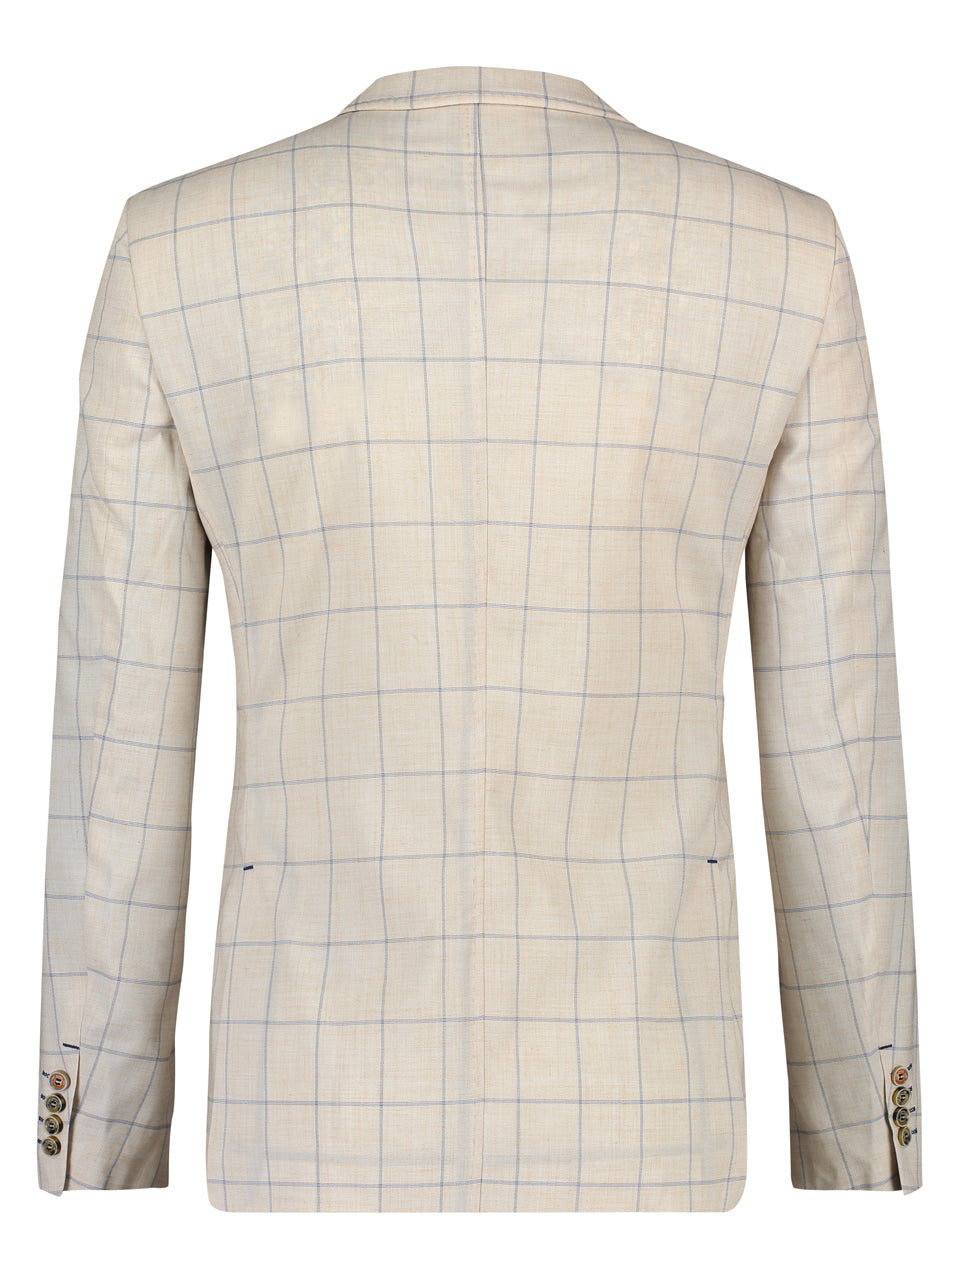 A Fish Named Fred Jacket in Beige Window Pane Check - MitchellMcCabe